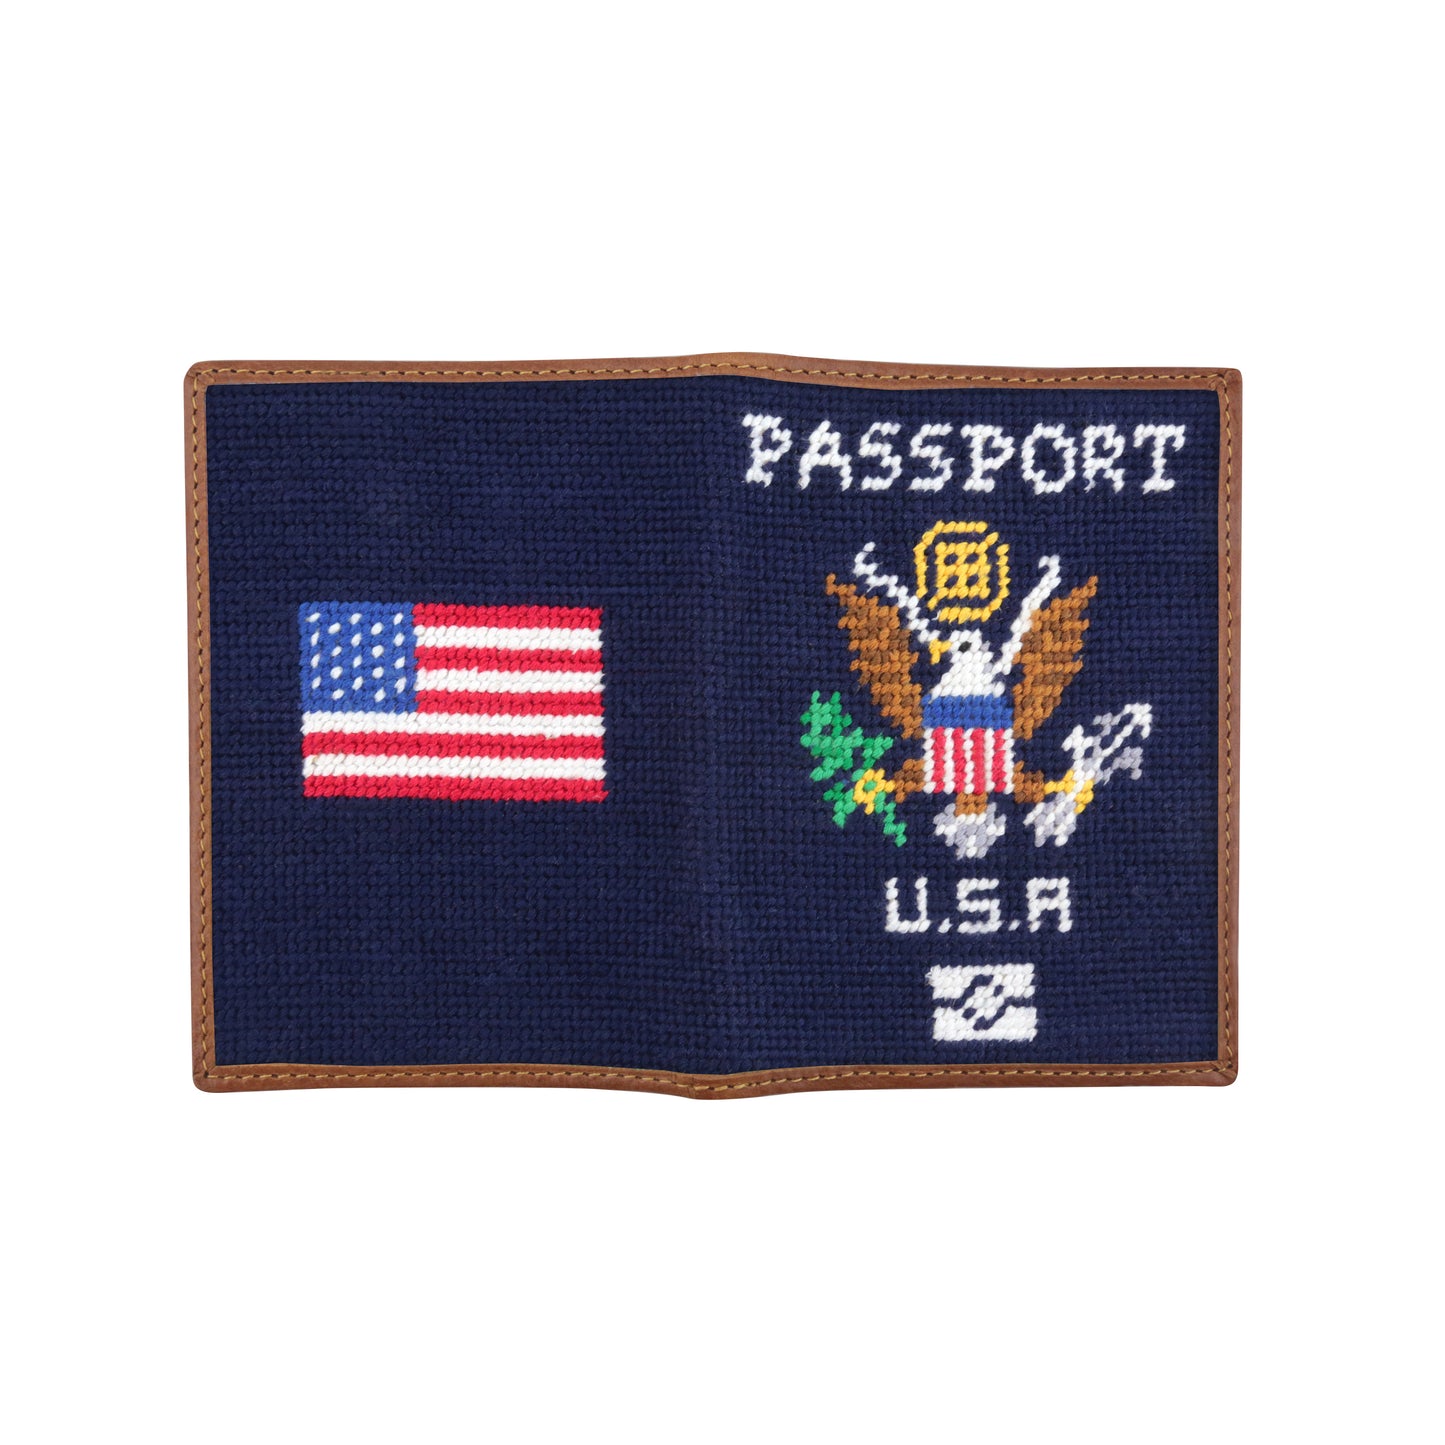 Needlepoint passport case with Great Seal of the United States on one side and United States Flag on the other.